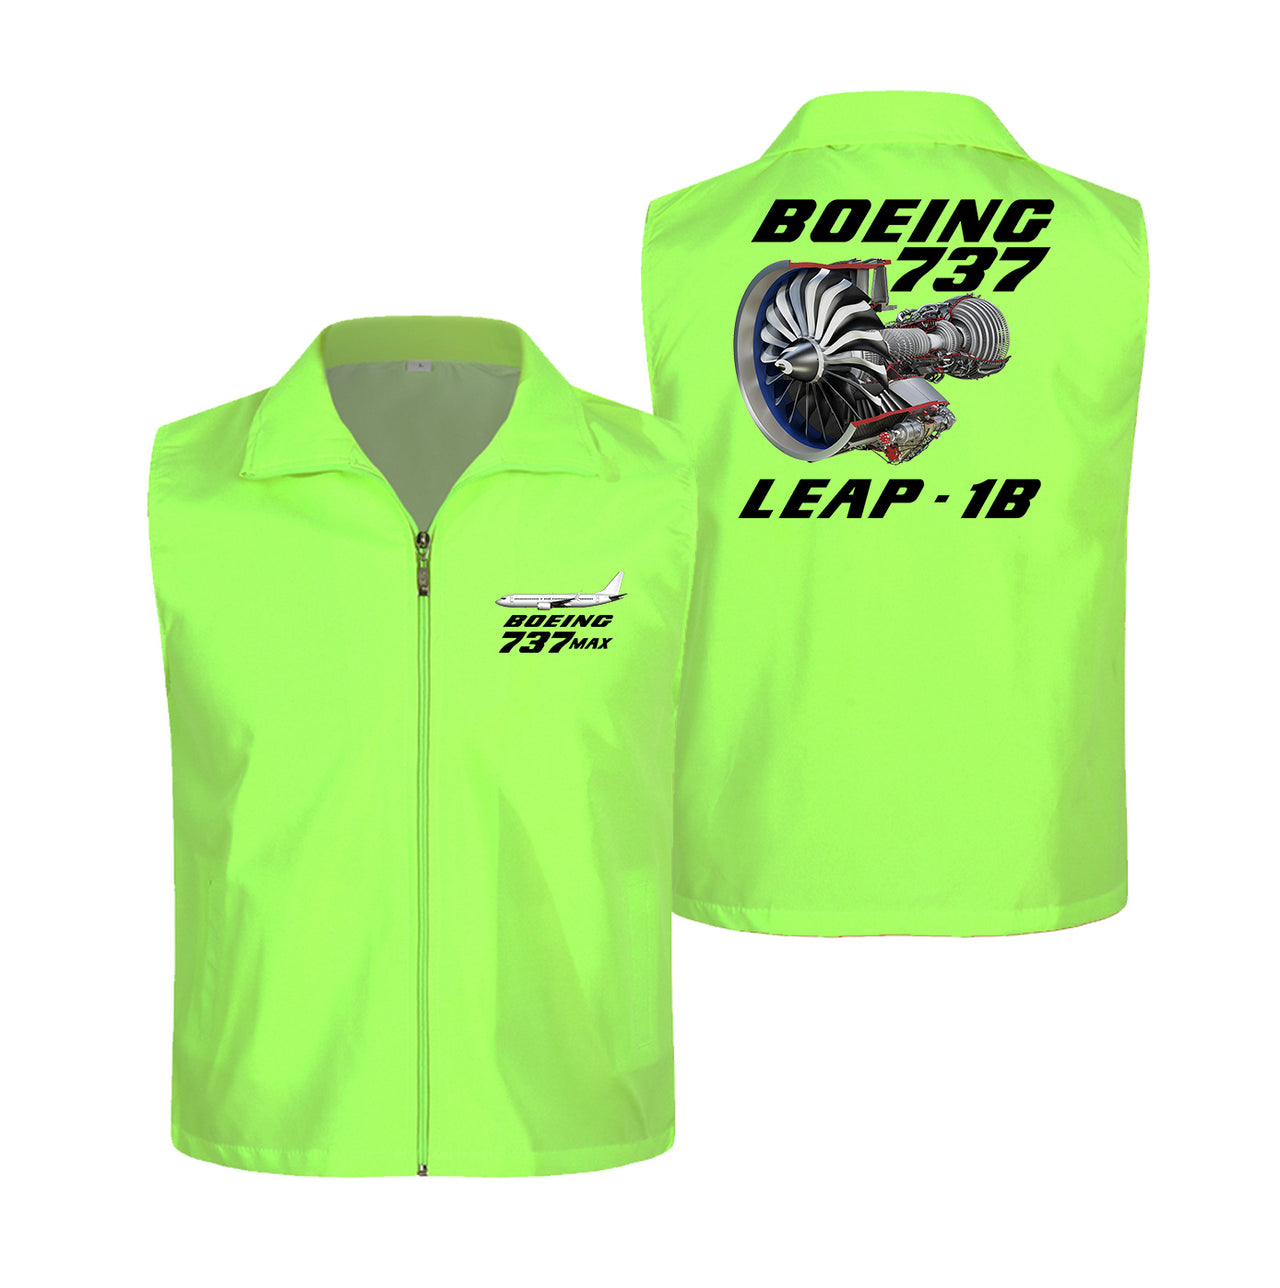 Boeing 737 & Leap 1B Designed Thin Style Vests